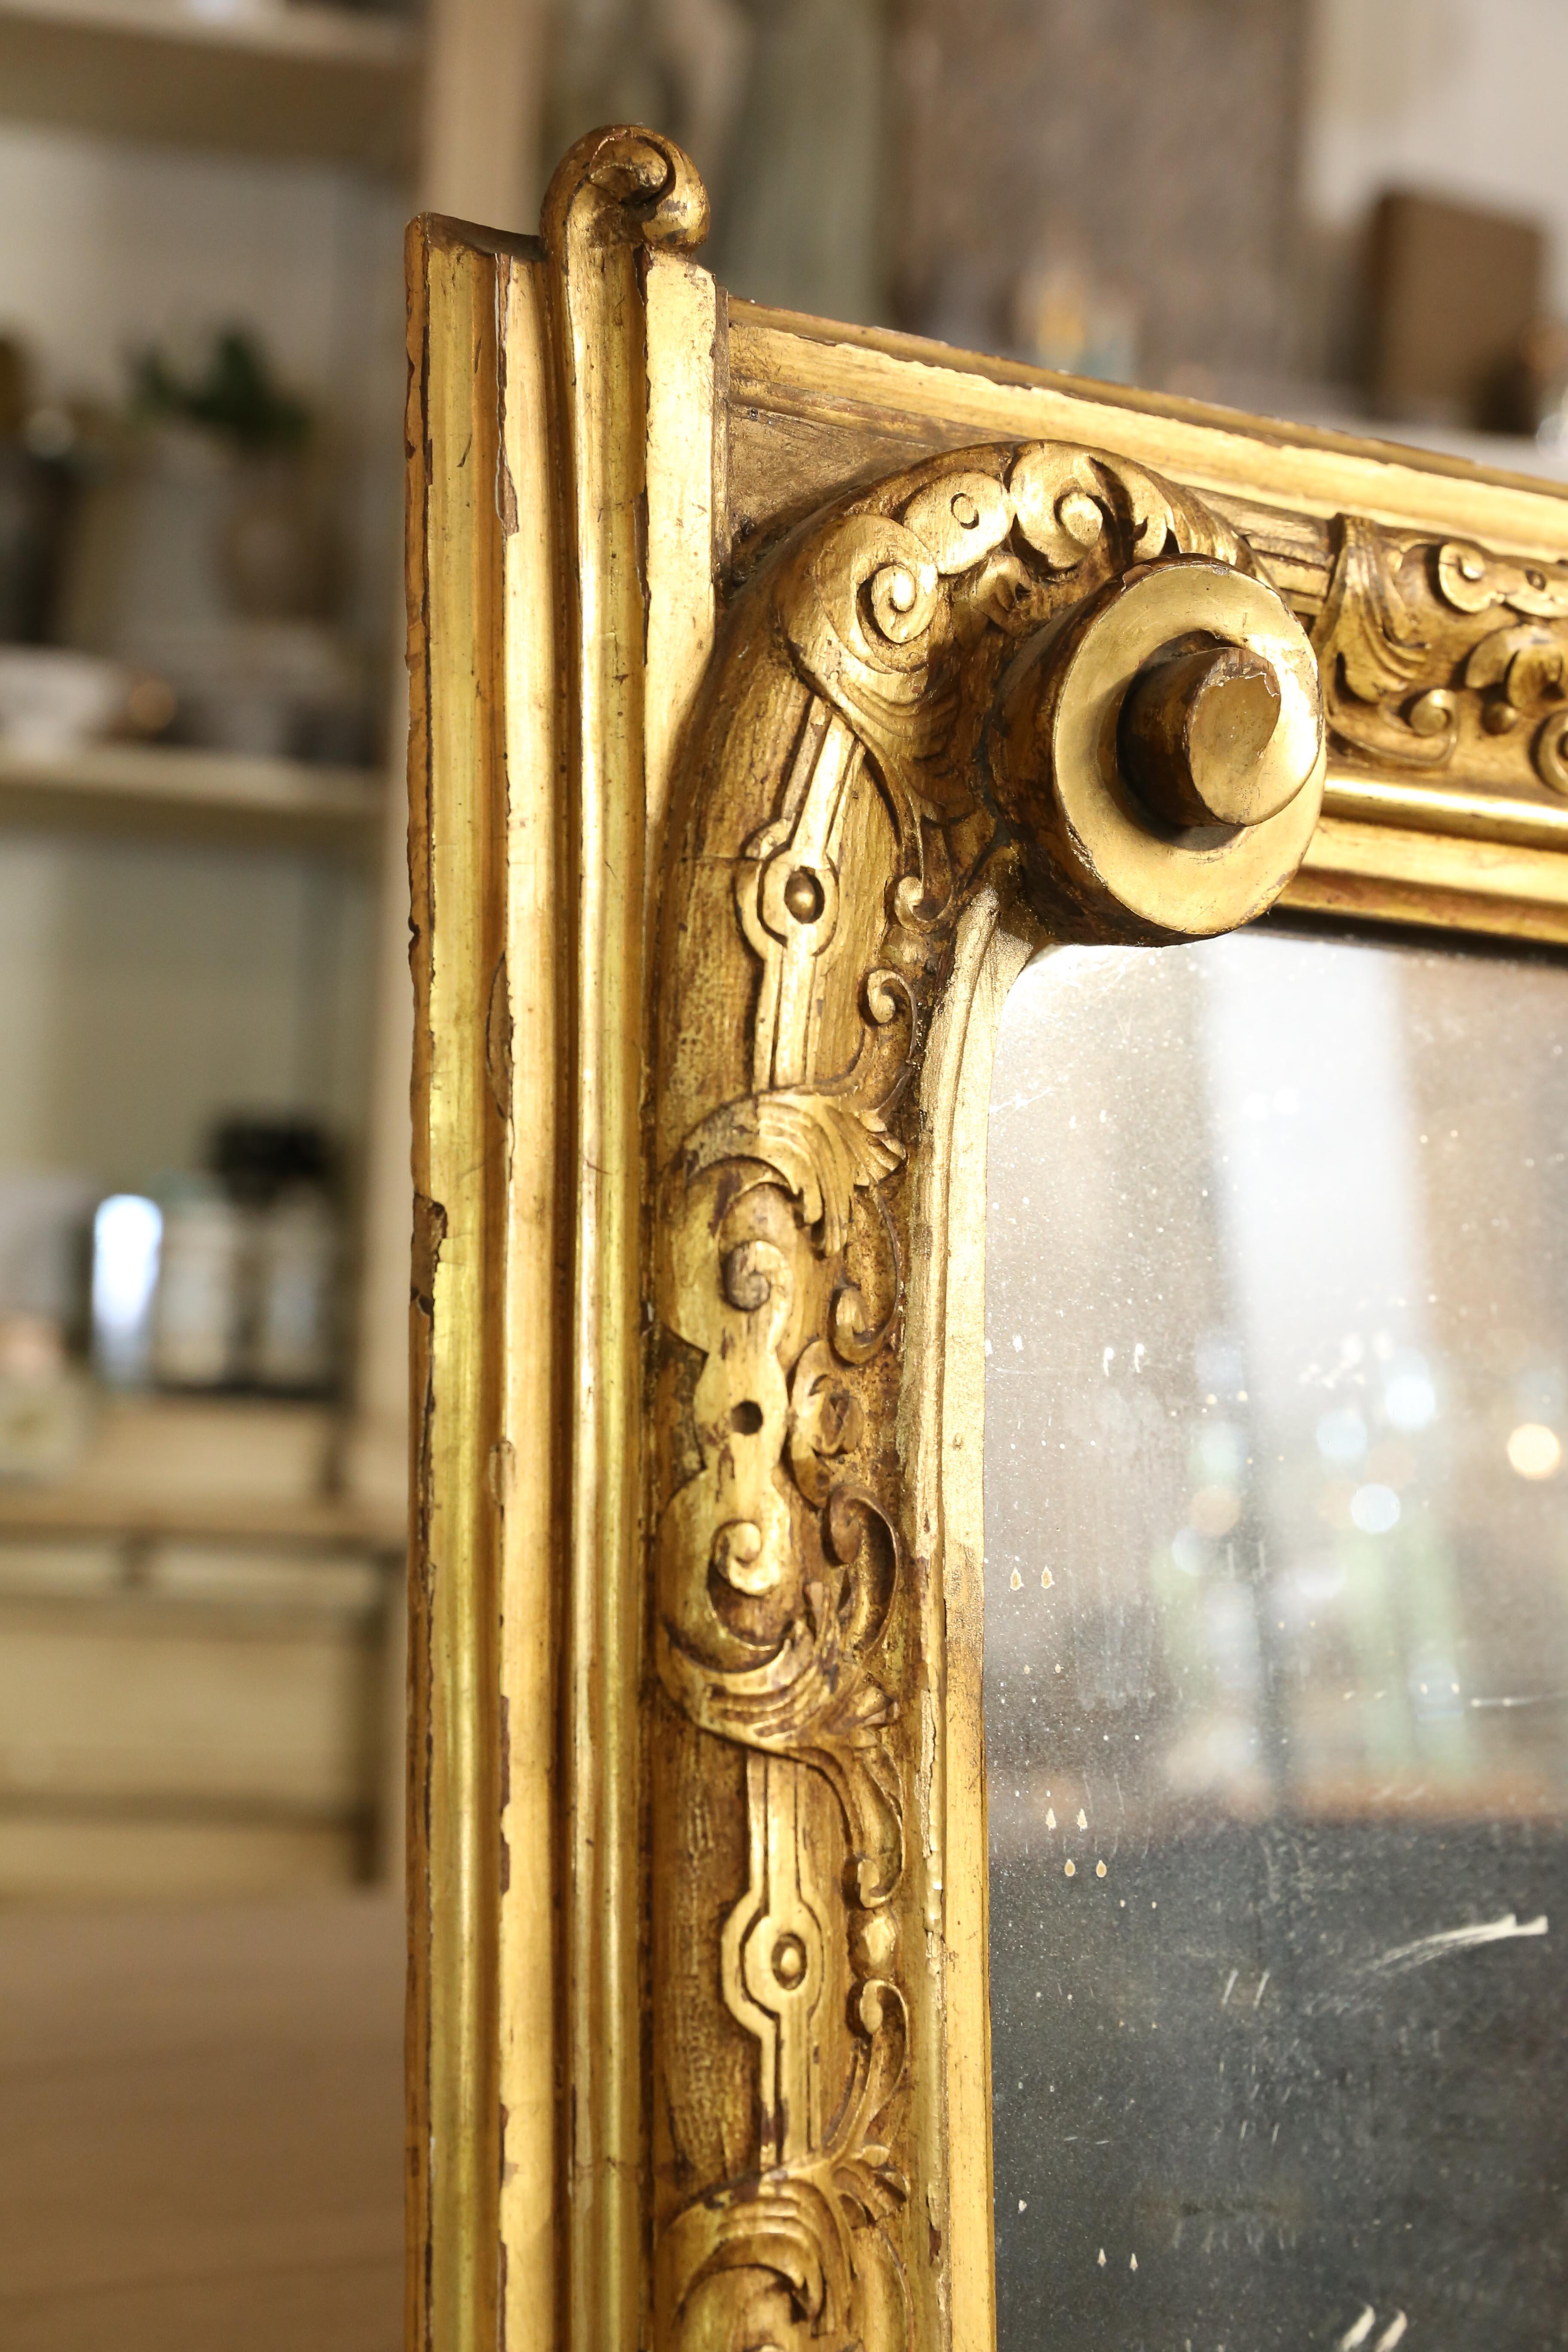 Hand-Carved Antique Gilt Carved Wall Mirror with Scroll Details, circa 1870